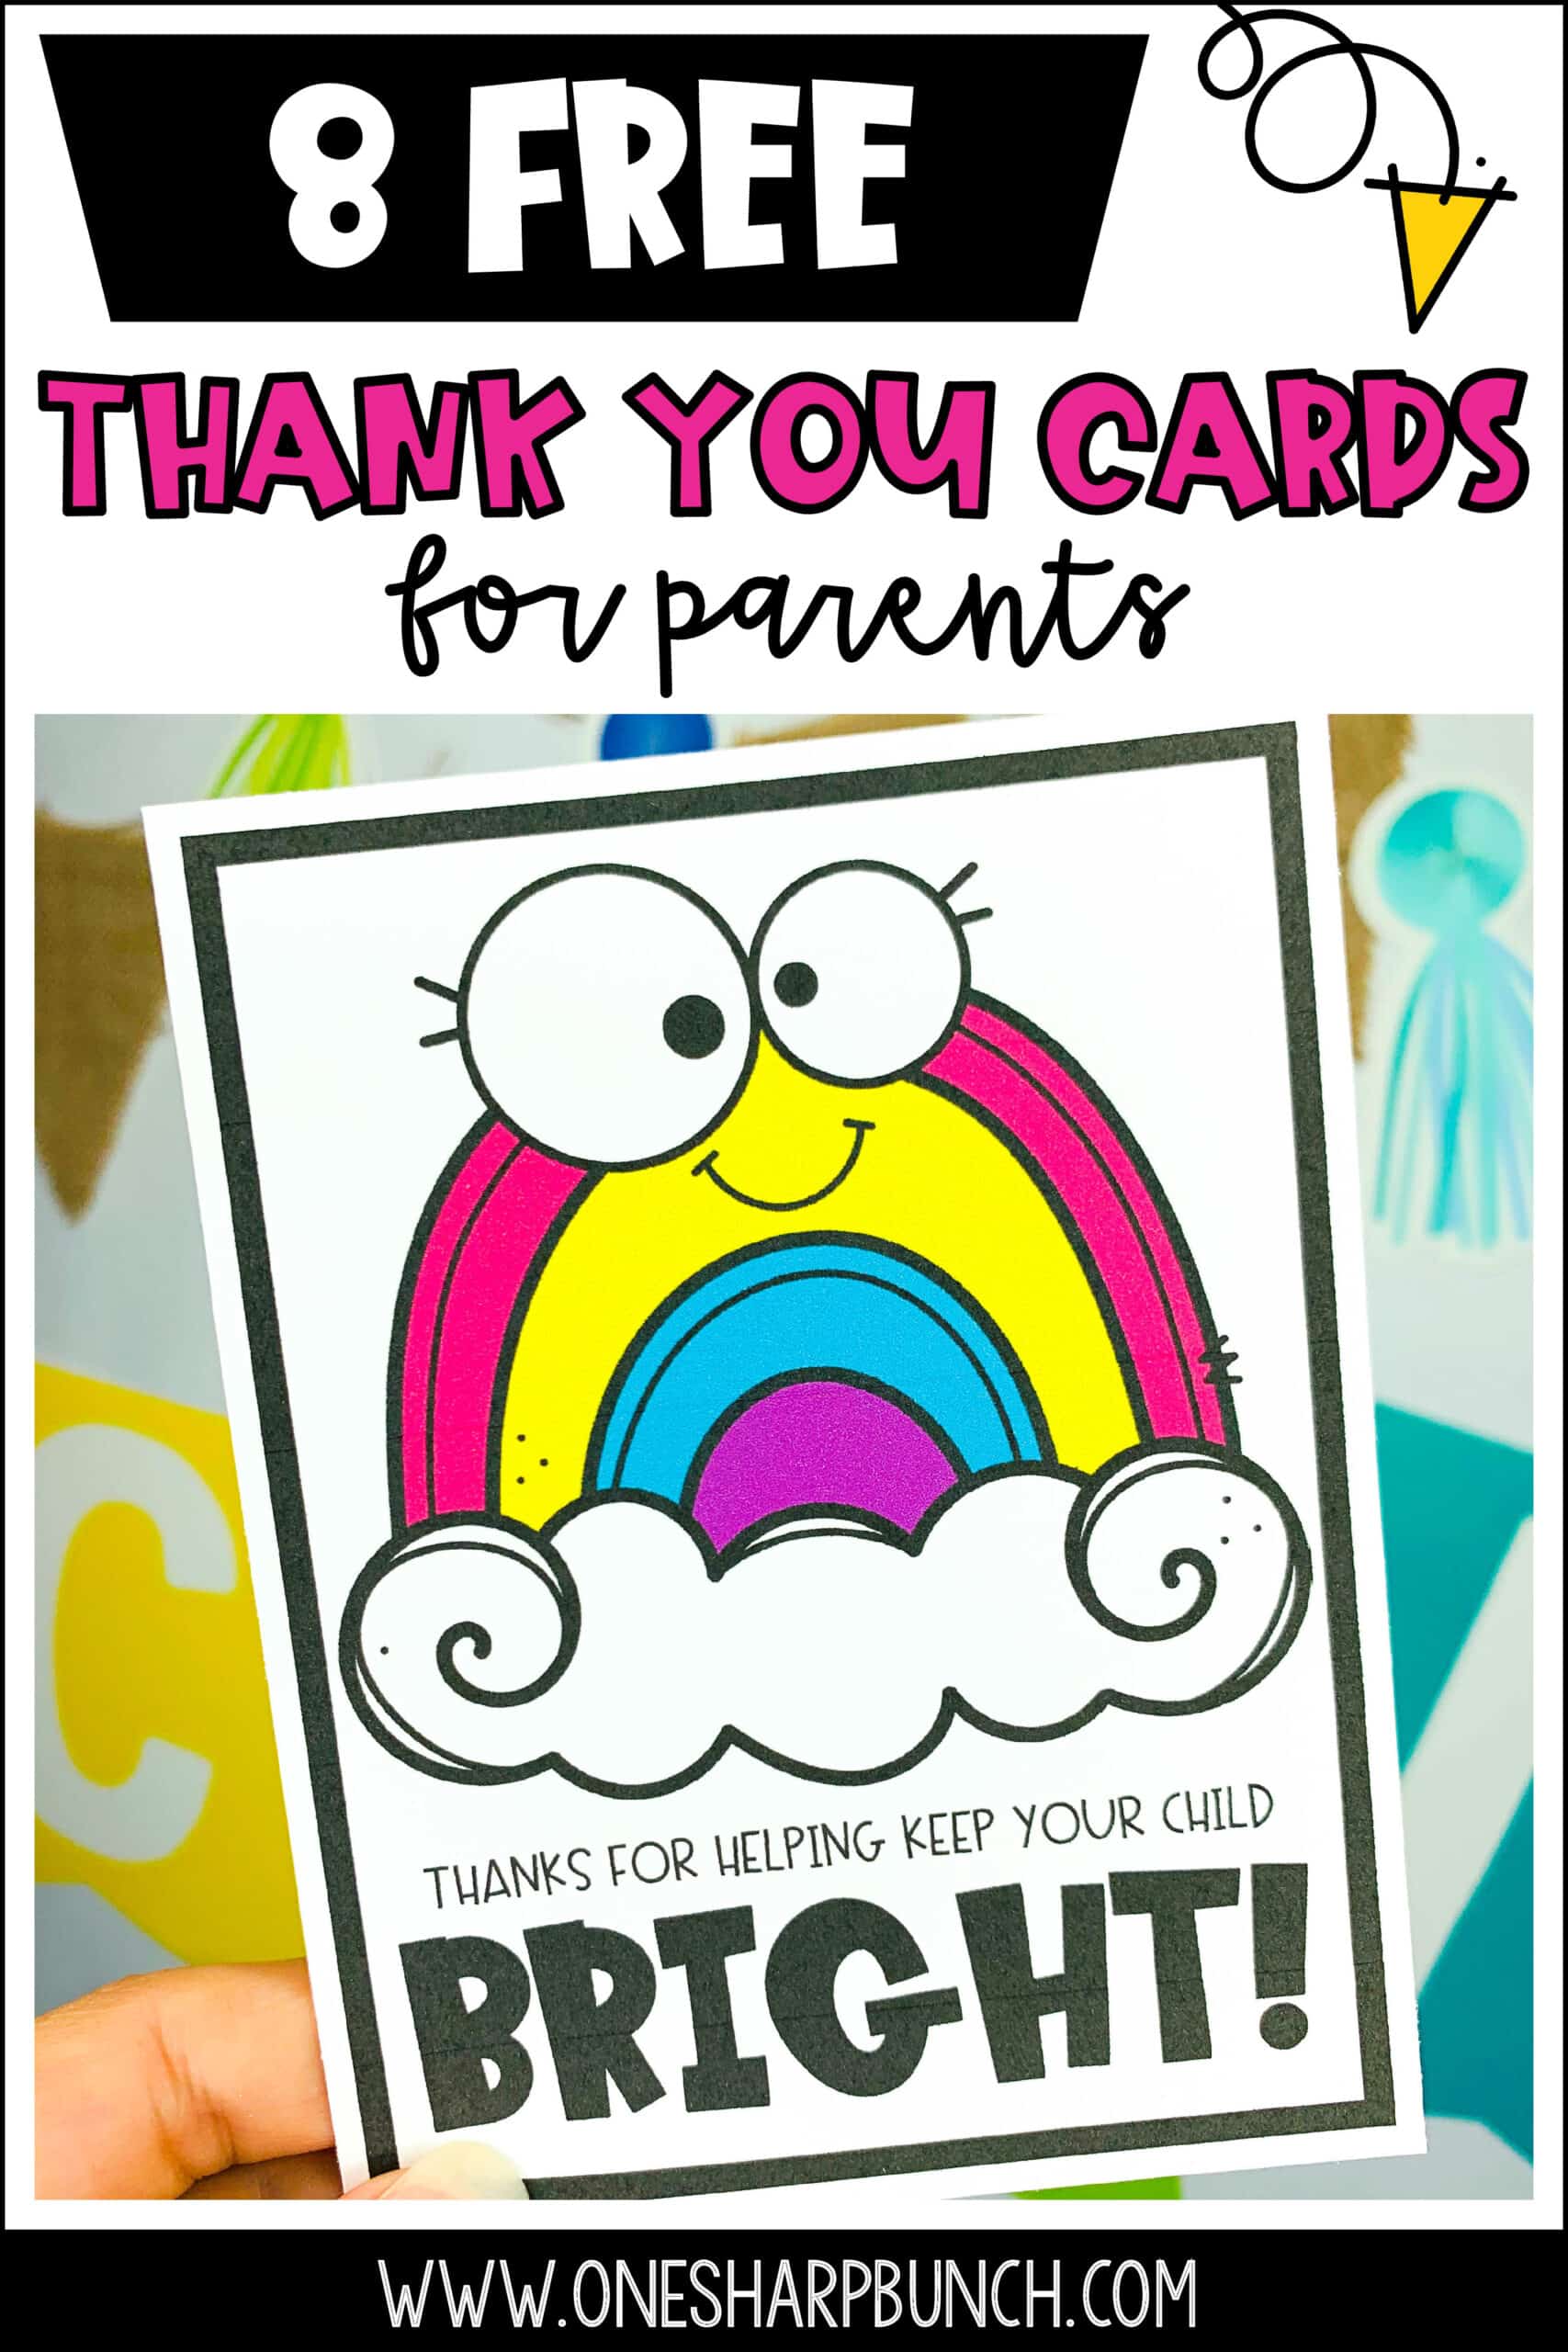 As your end of the year activities and end of the year award ceremony commence, show your appreciation with these parent thank you cards from teacher! Along with parent thank you gifts for classroom volunteers, use these parent volunteer thank you cards to say thank you. When the end of the year countdown ends, send a parent thank you from teacher. A parent thank you card is an easy way to show gratitude. Download these FREE thank you cards for parent volunteers today!